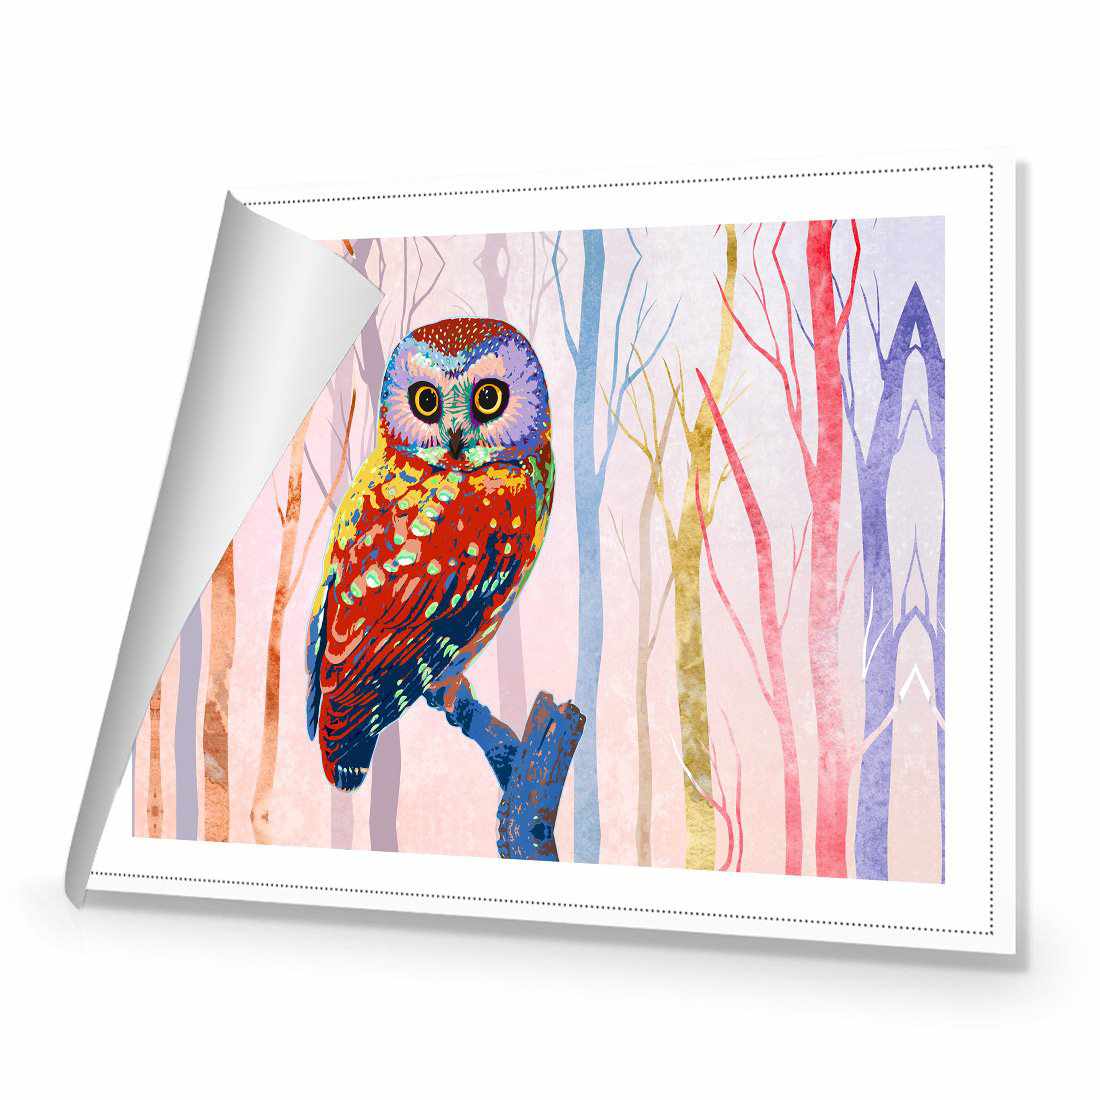 Bright Wise Owl, Light Canvas Art-Canvas-Wall Art Designs-45x30cm-Rolled Canvas-Wall Art Designs